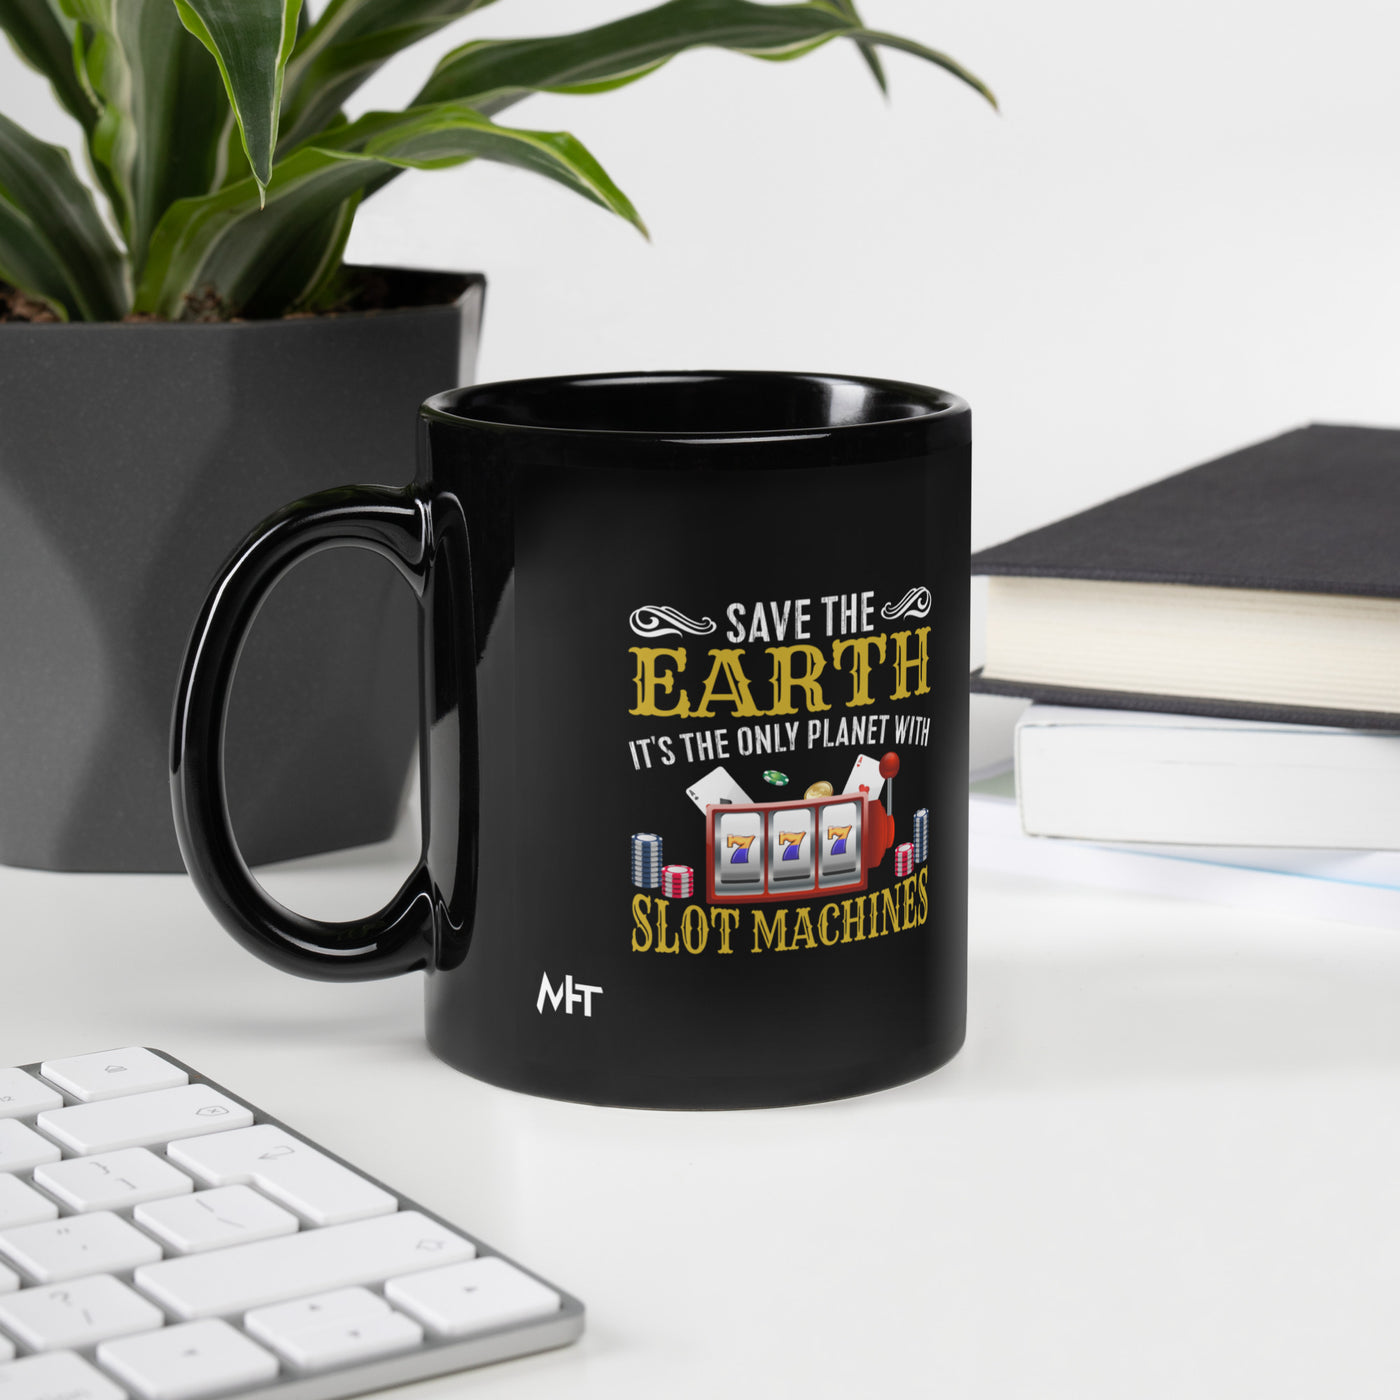 Save the Earth; it's the only Planet with Slot Machines - Black Glossy Mug